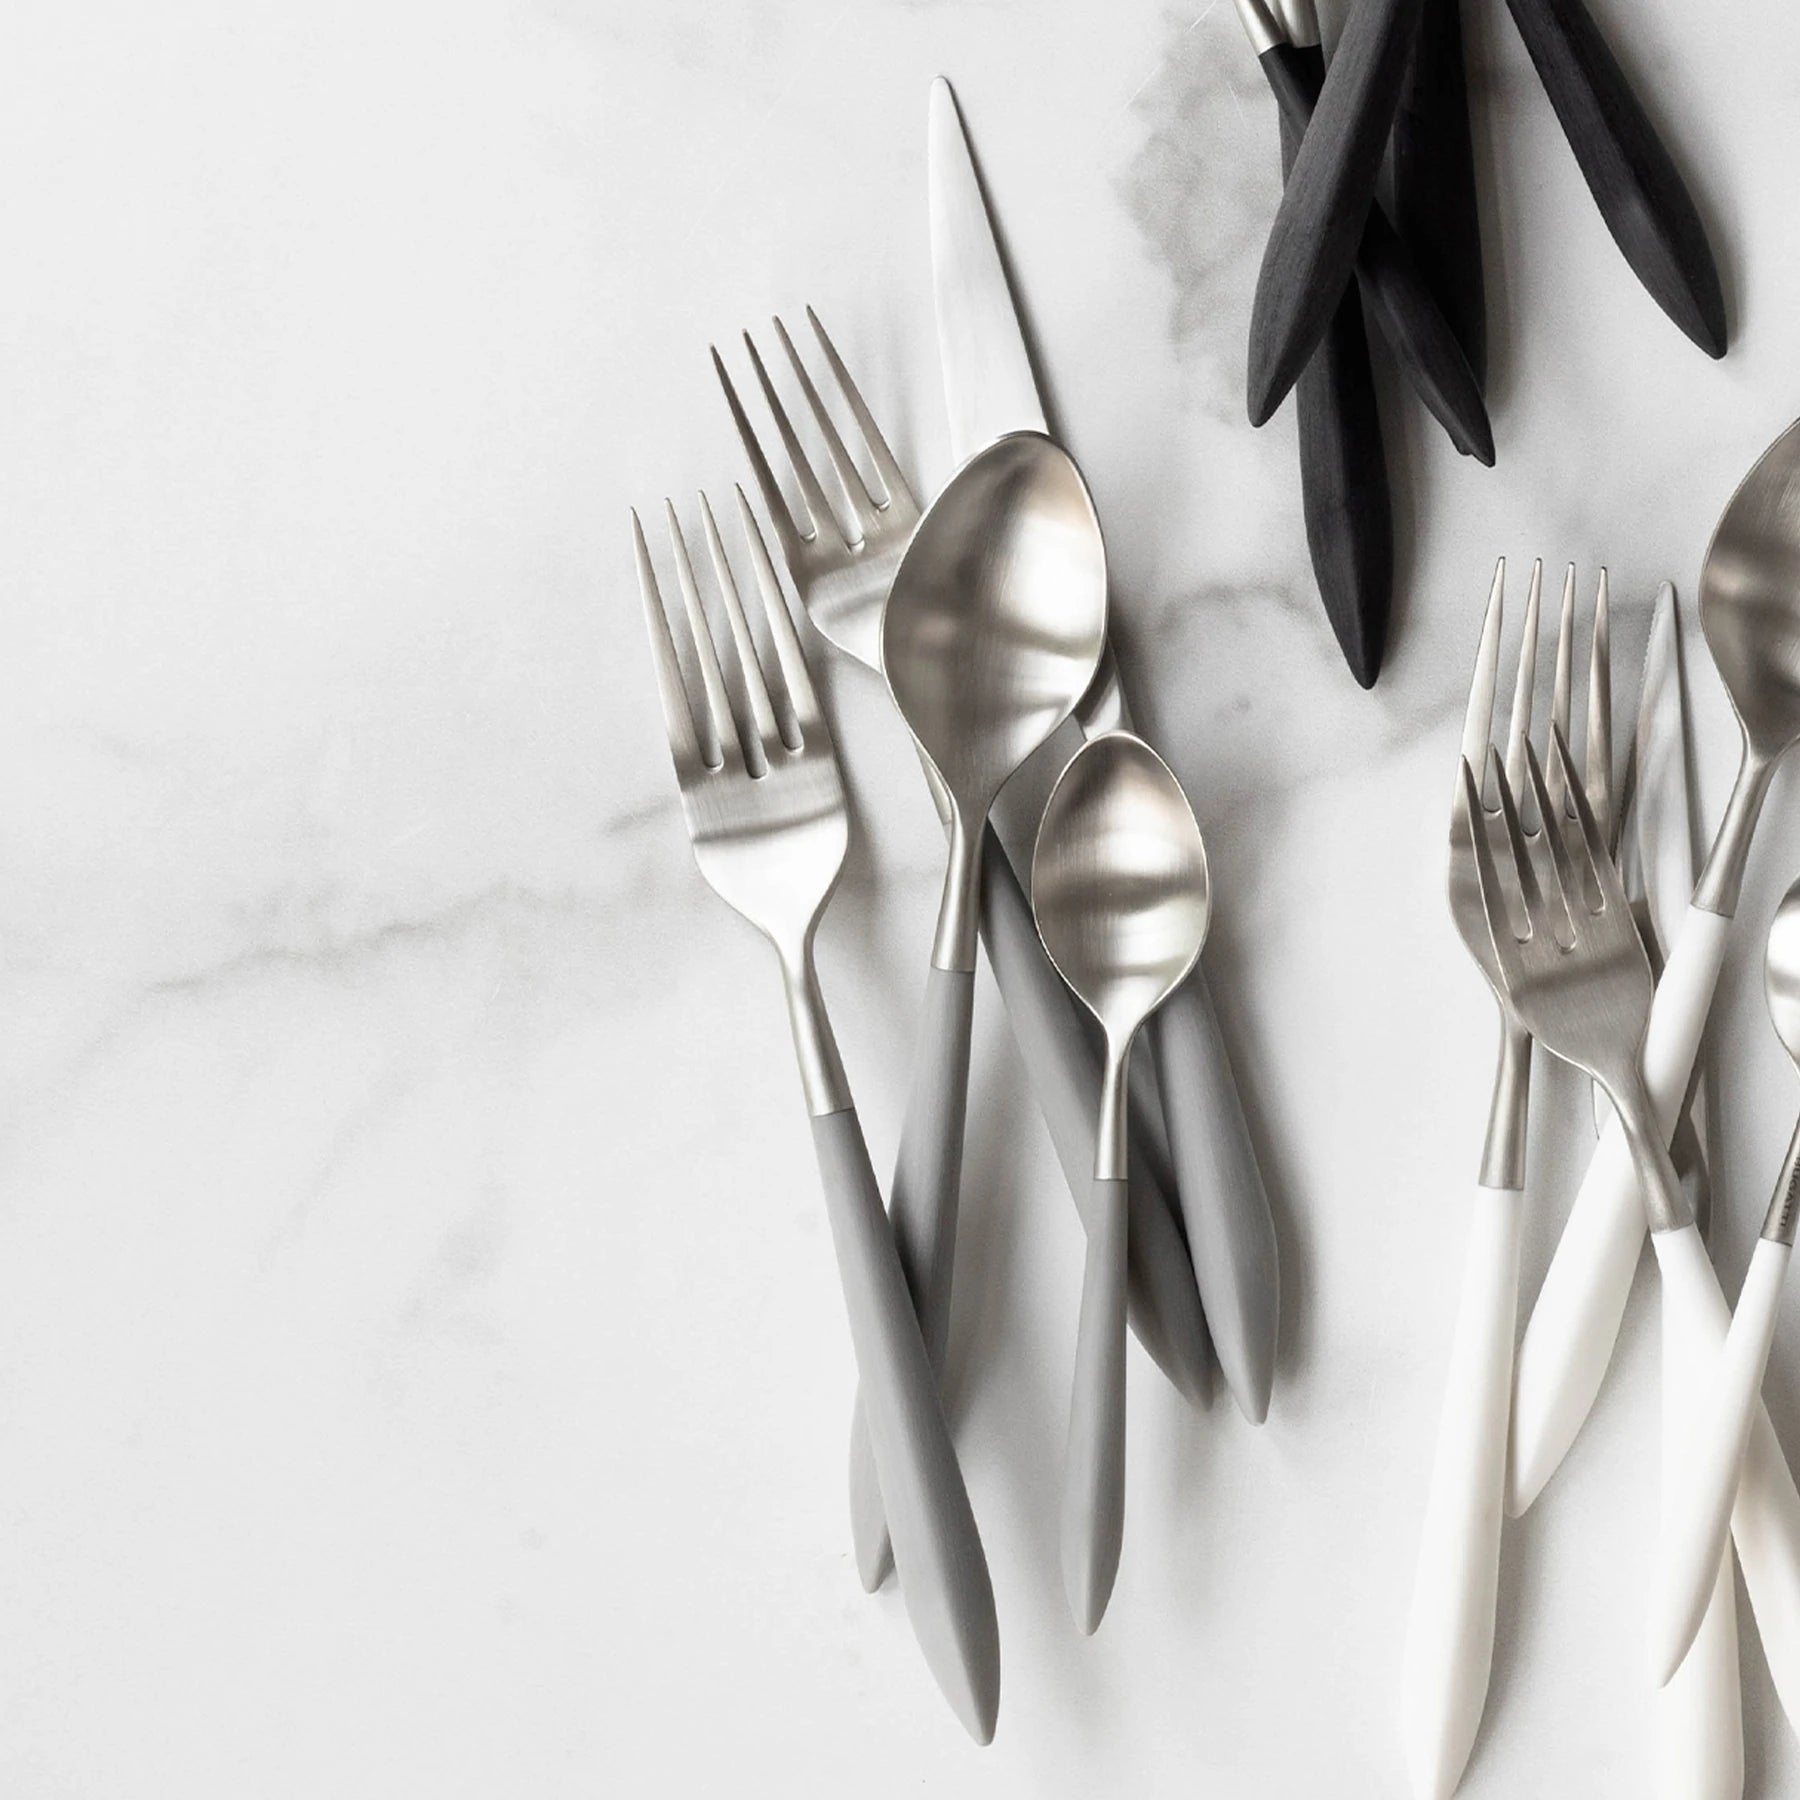 Ares Argento & Light Grey Five Piece Place Setting